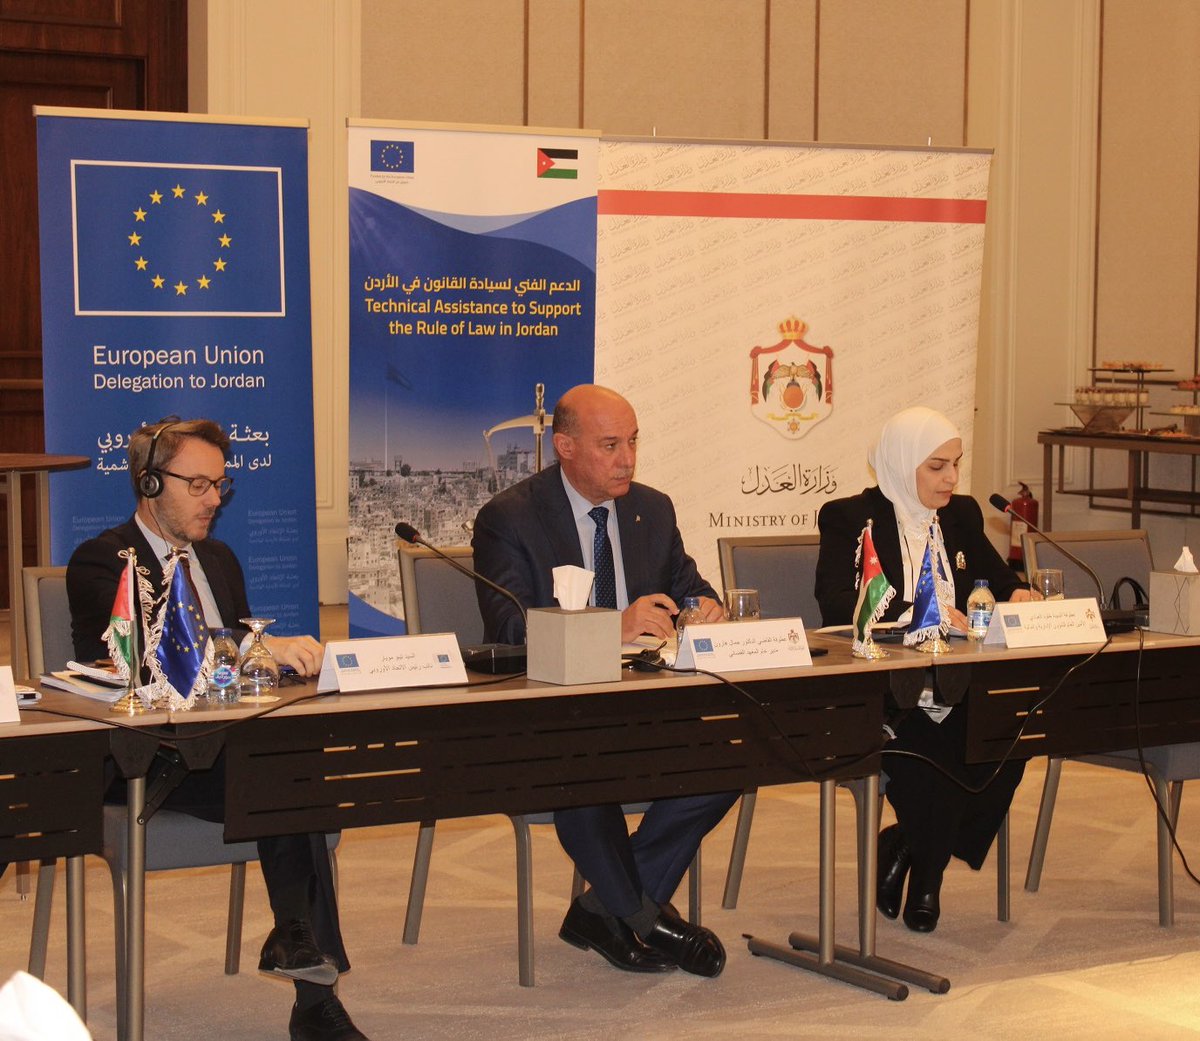 This week’ steering committee on EU support to the Rule of Law was an opportunity to take stock on progress notably in provision of free legal aid services and rehabilitation programmes in cooperation with @moj_gov and @IOM_Jordan @giz_gmbh